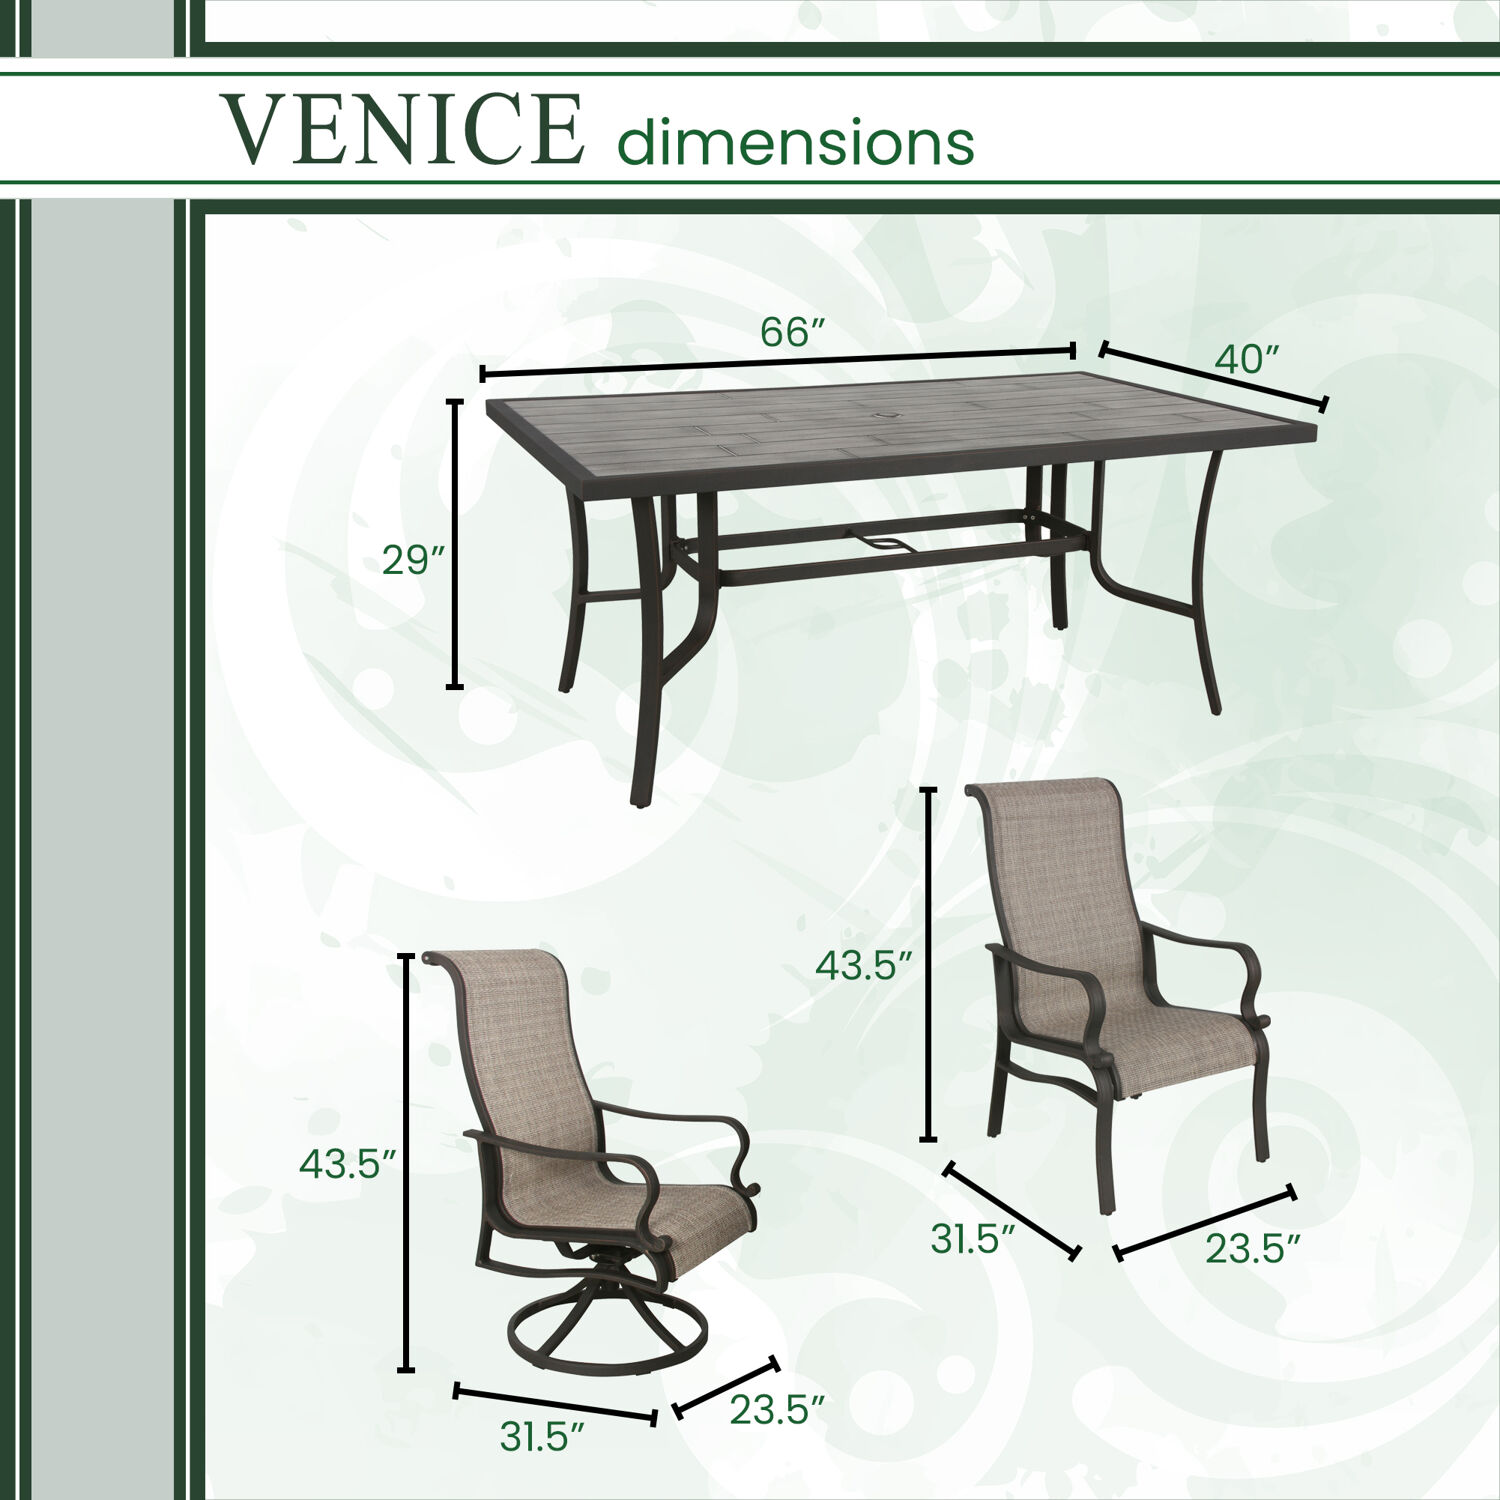 Hanover Venice 7-Piece Dining Set with 2 Sling Swivel Rocker Chairs, 4 Sling Stationary Chairs and 66 in. x 40 in. Slat Top Table - image 3 of 12